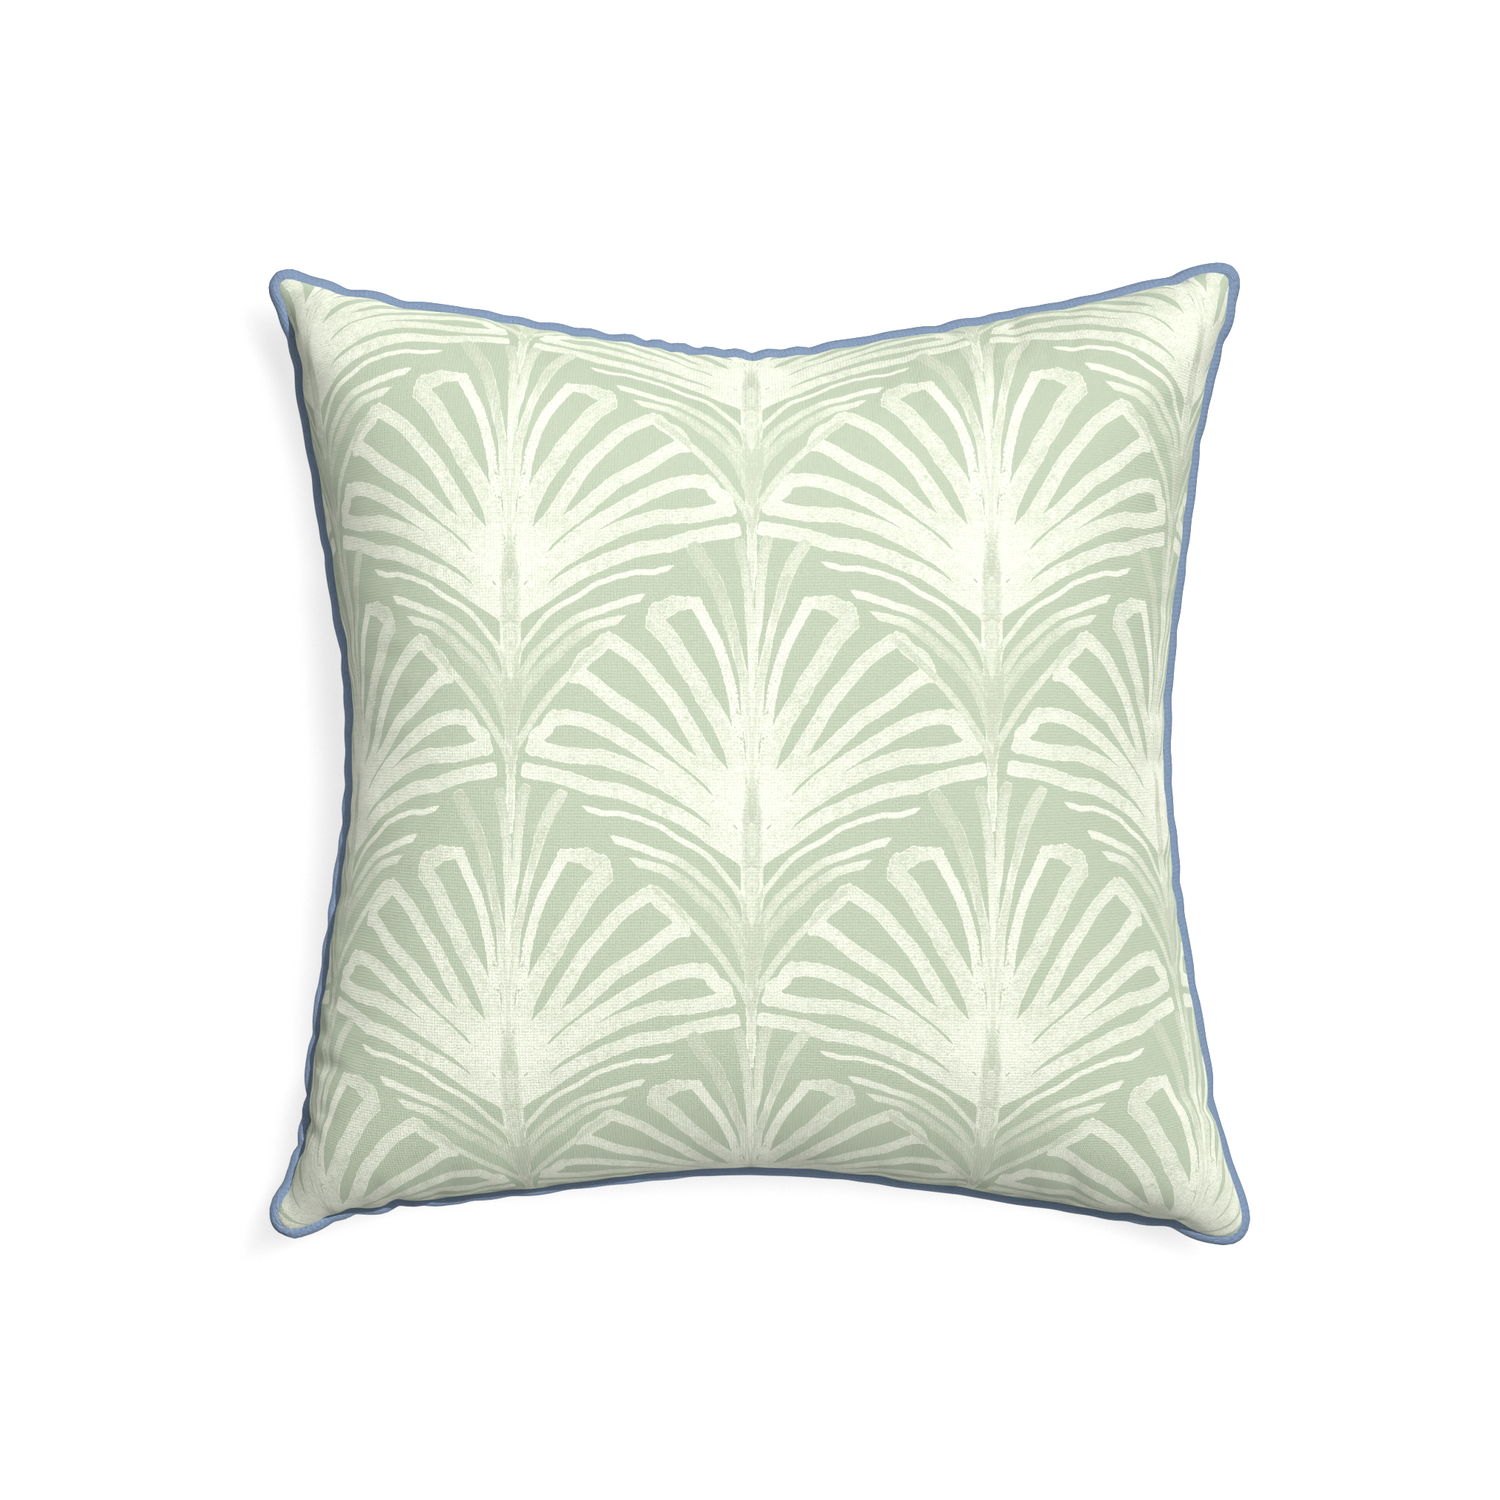 22-square suzy sage custom pillow with sky piping on white background